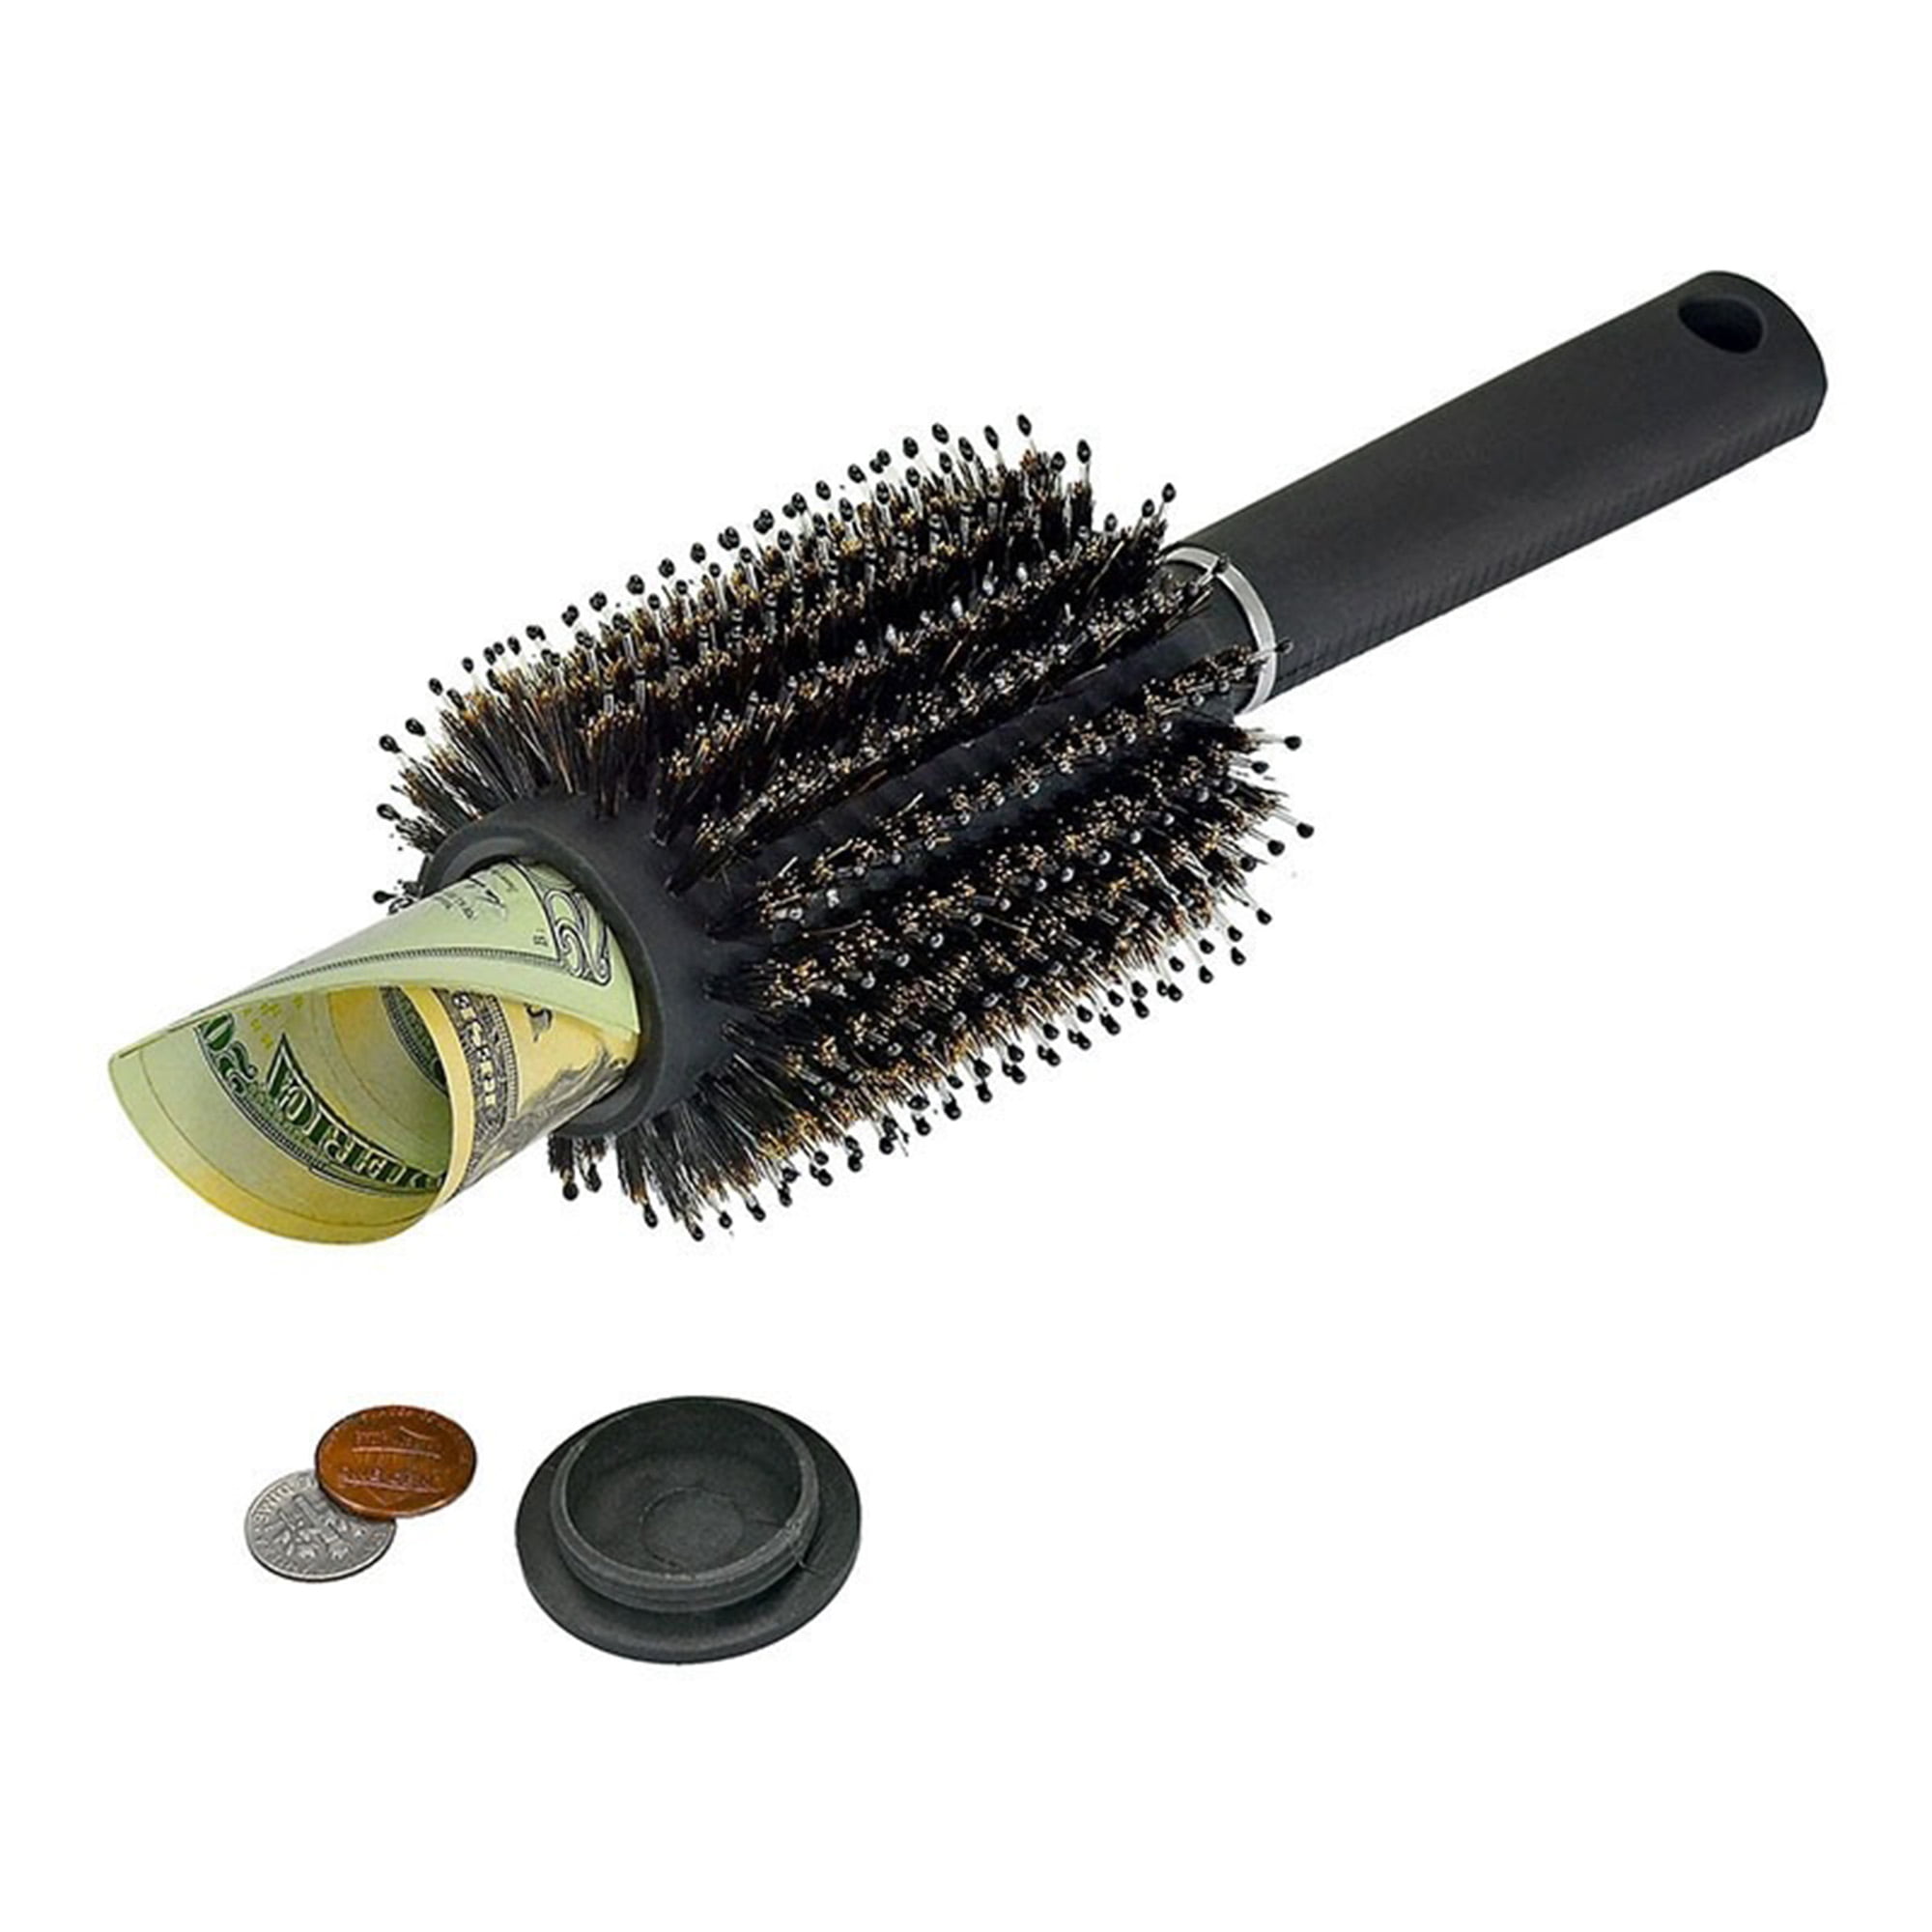 Real Hair Brush Stash Comb Safe Diversion Security Hidden Hollow Container Red 